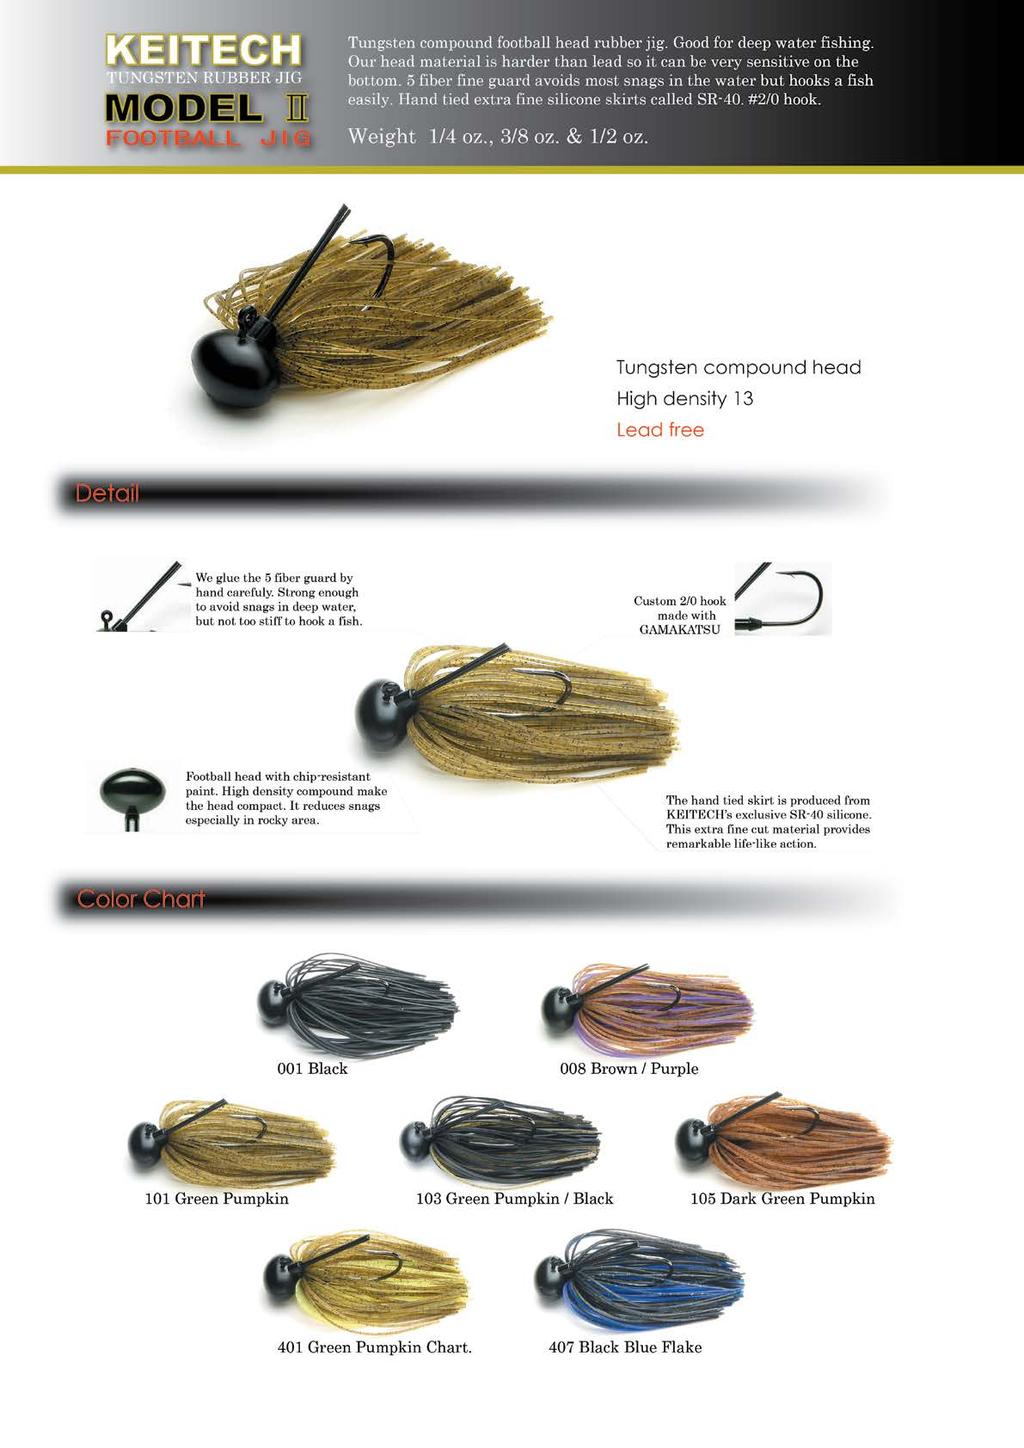 TUNGSTEN RUBBER JIG MODEL II FOOTBALL JIG The Model II Football Jig is designed for deep water jig fishing. The Tungsten compound head is 30% harder than lead and extremely sensitive.